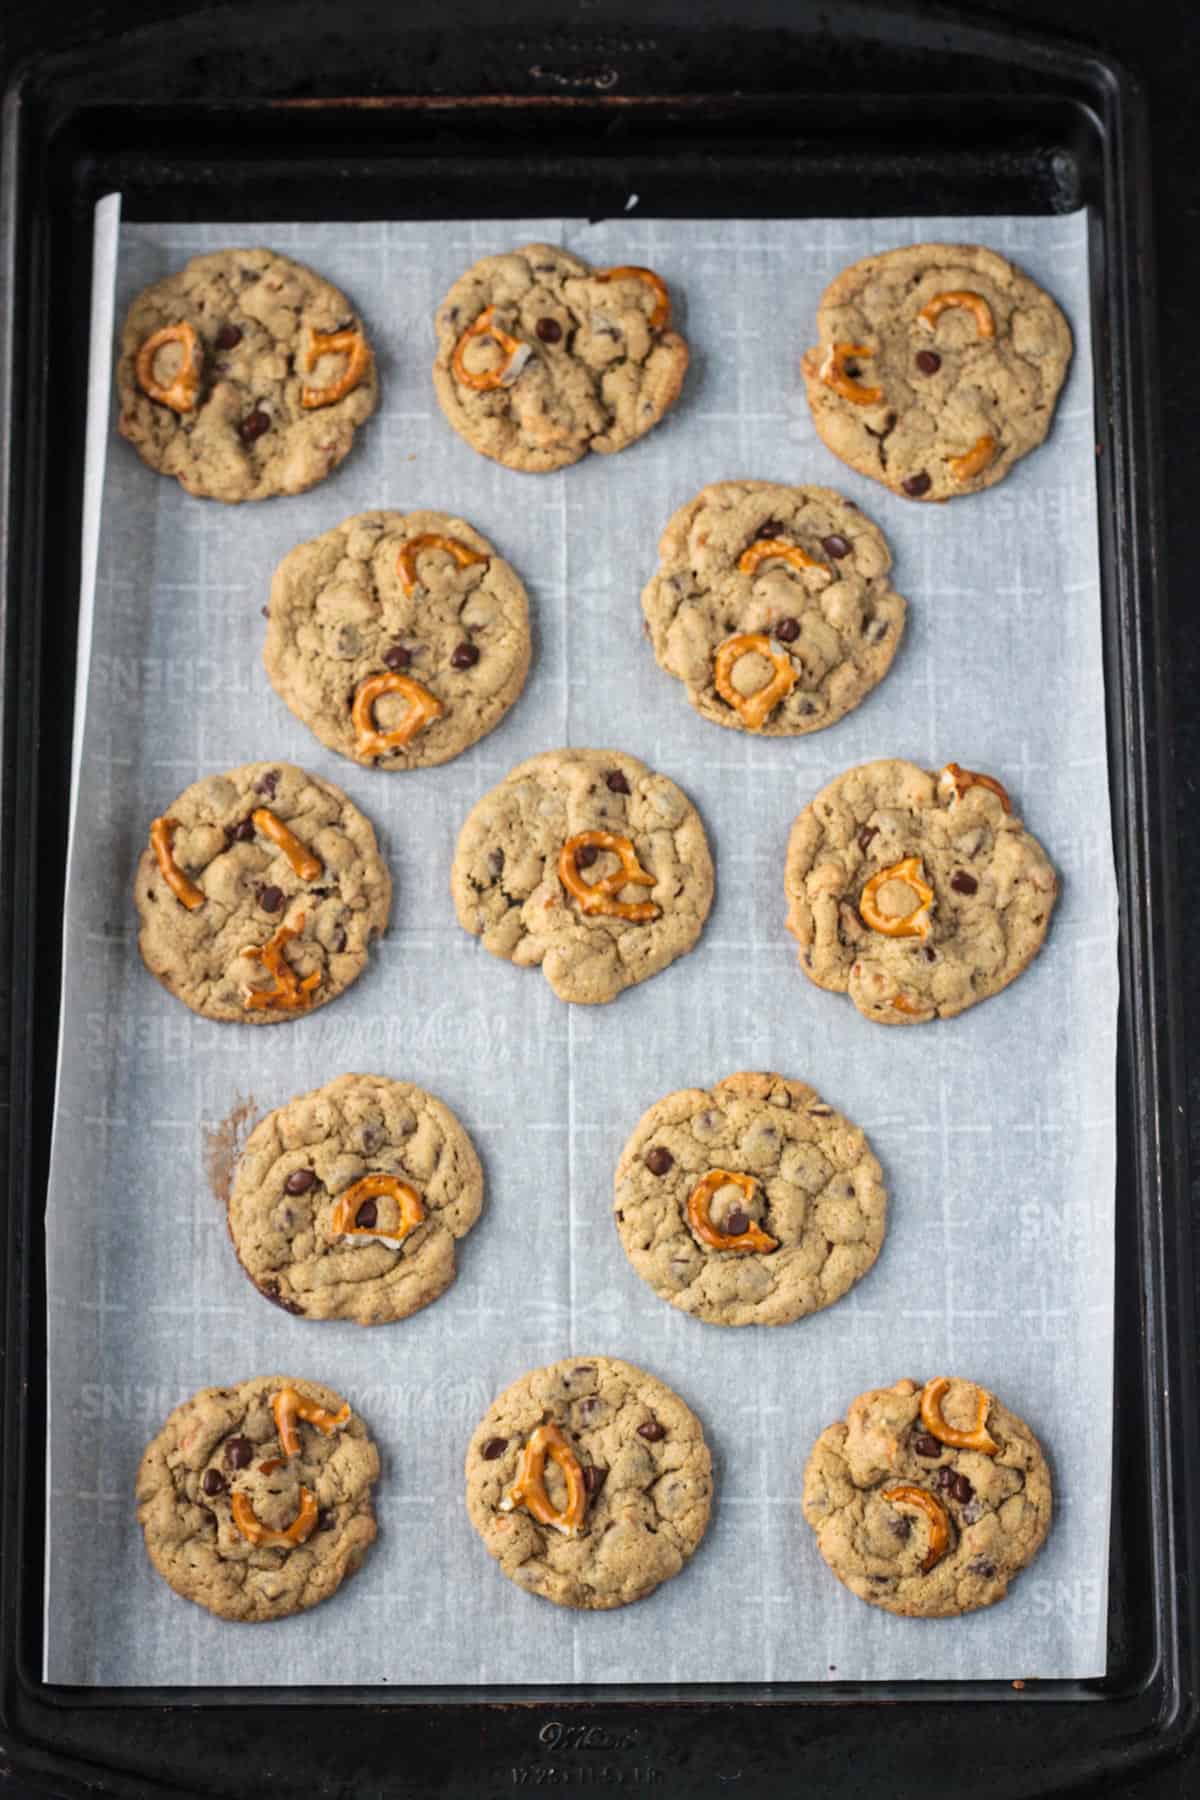 Baked cookies on a parchment lined cookie sheet.